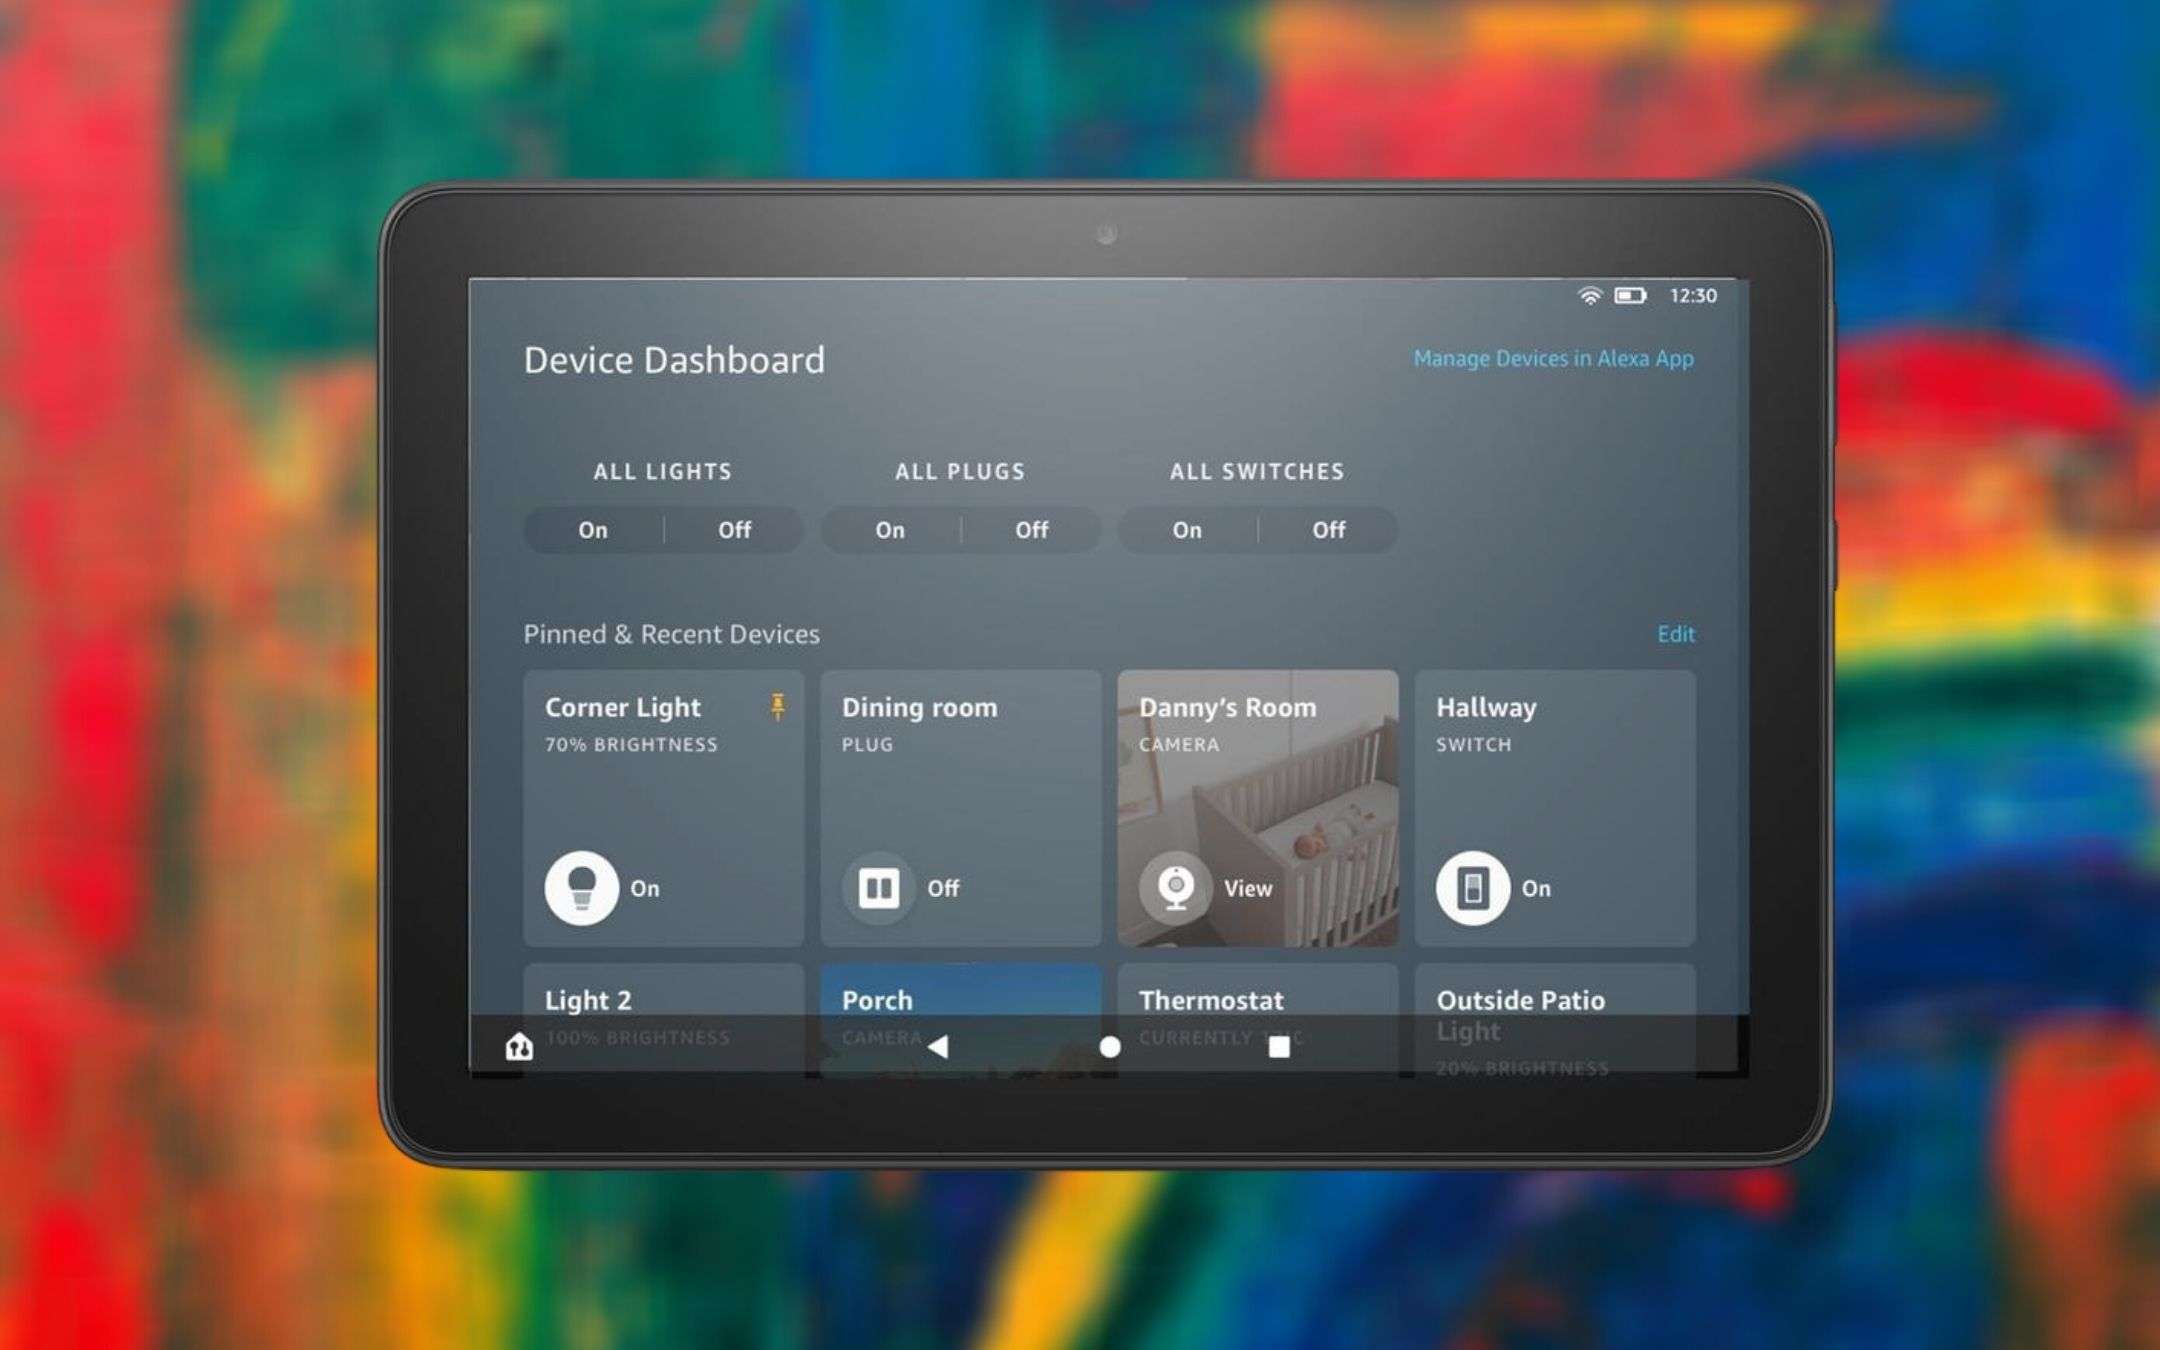 Amazon Fire tablet come smart display con un update